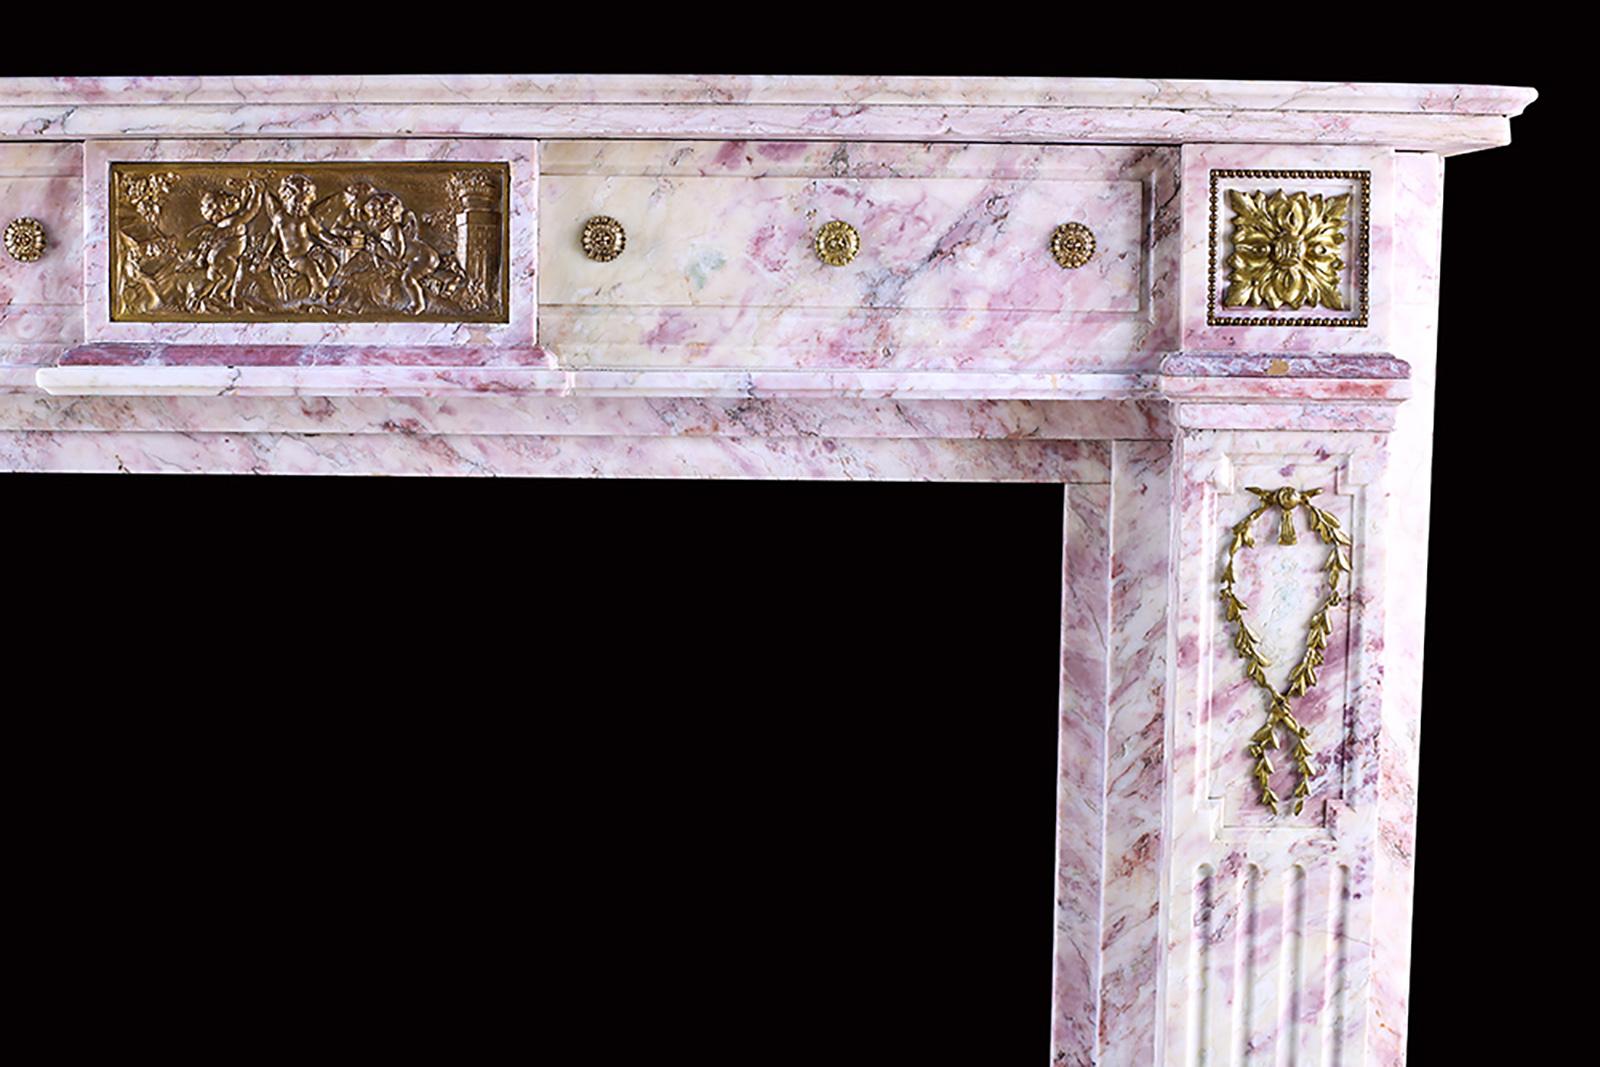 An Elegant Louis Xvi Style Fireplace Surround, Finely Carved In White And Pink Marble, Adorned With Scrolling Foliate And Floral Ormolu Decoration. French, Mid 19th Century.